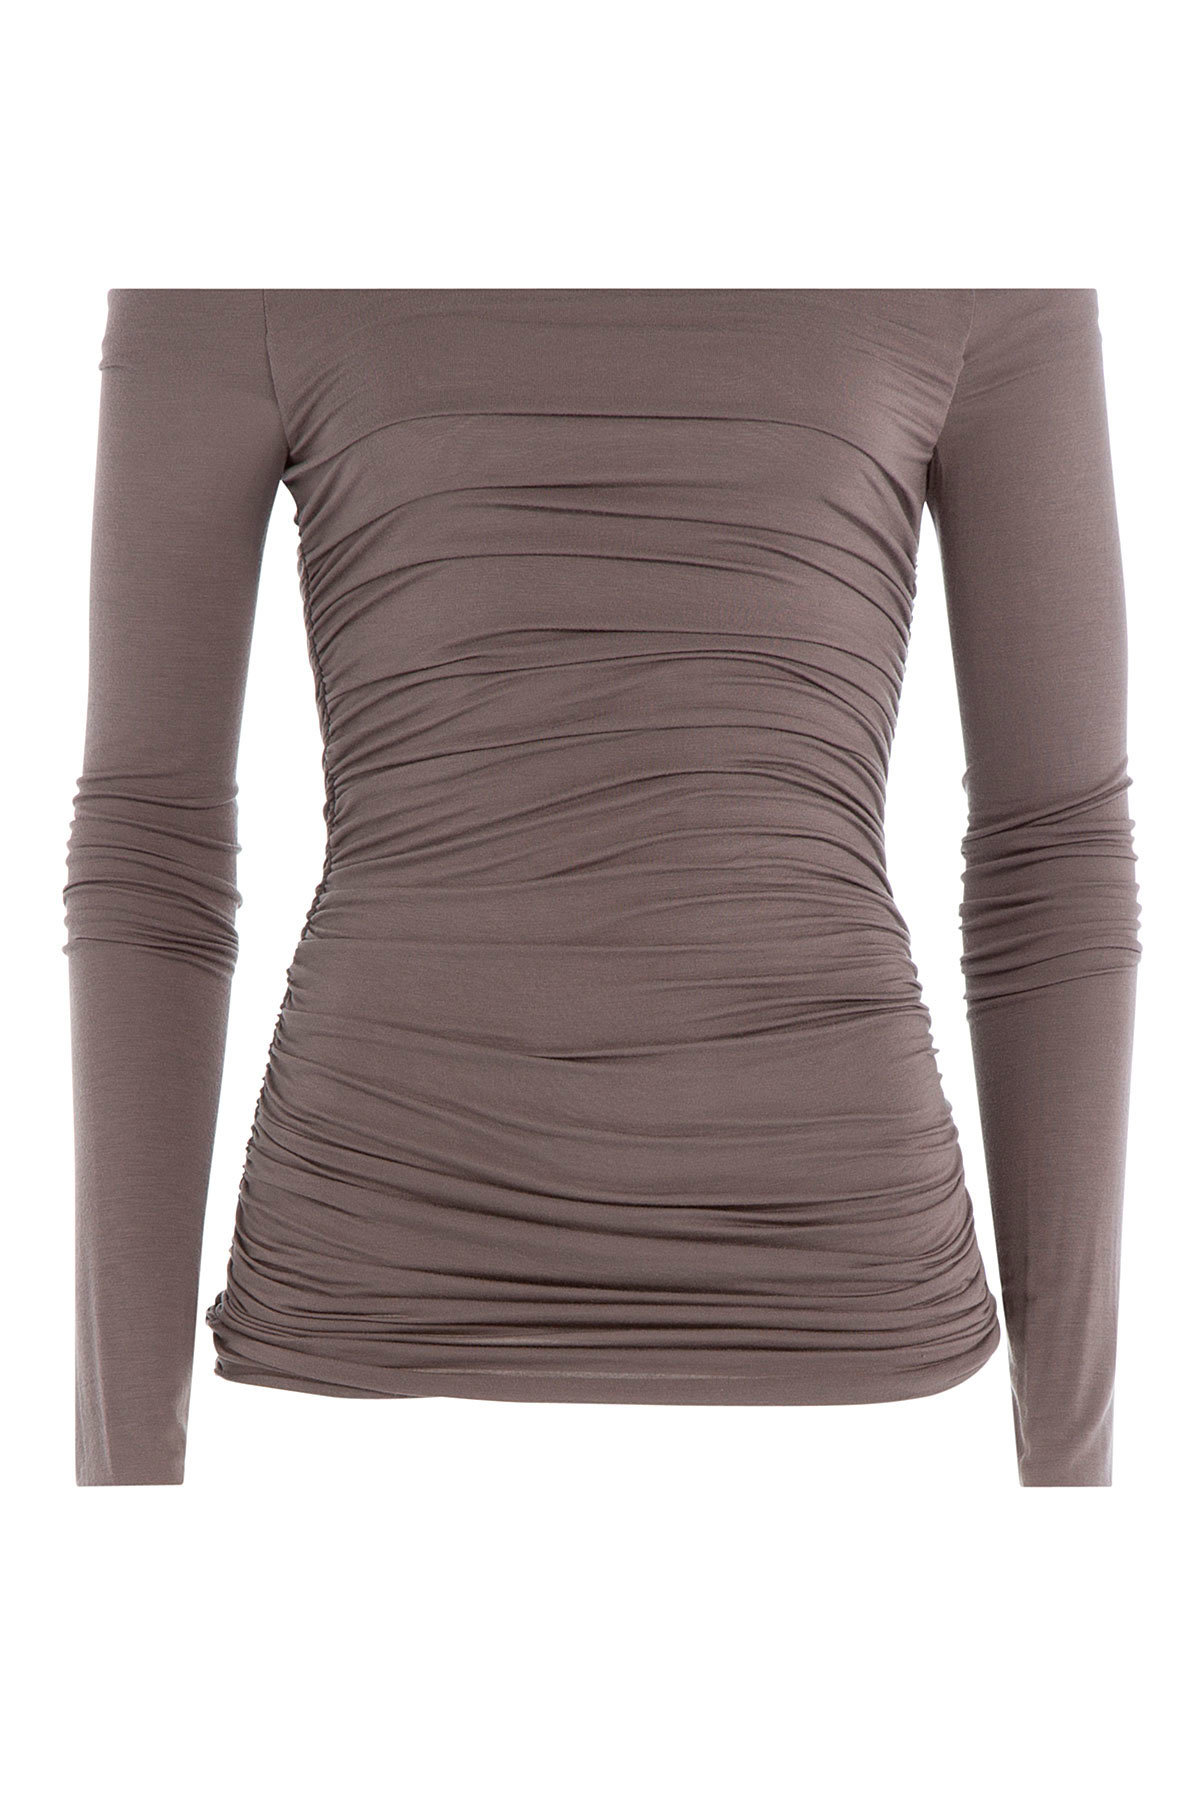 Bailey 44 - Draped Jersey Top with Bardot Shoulders